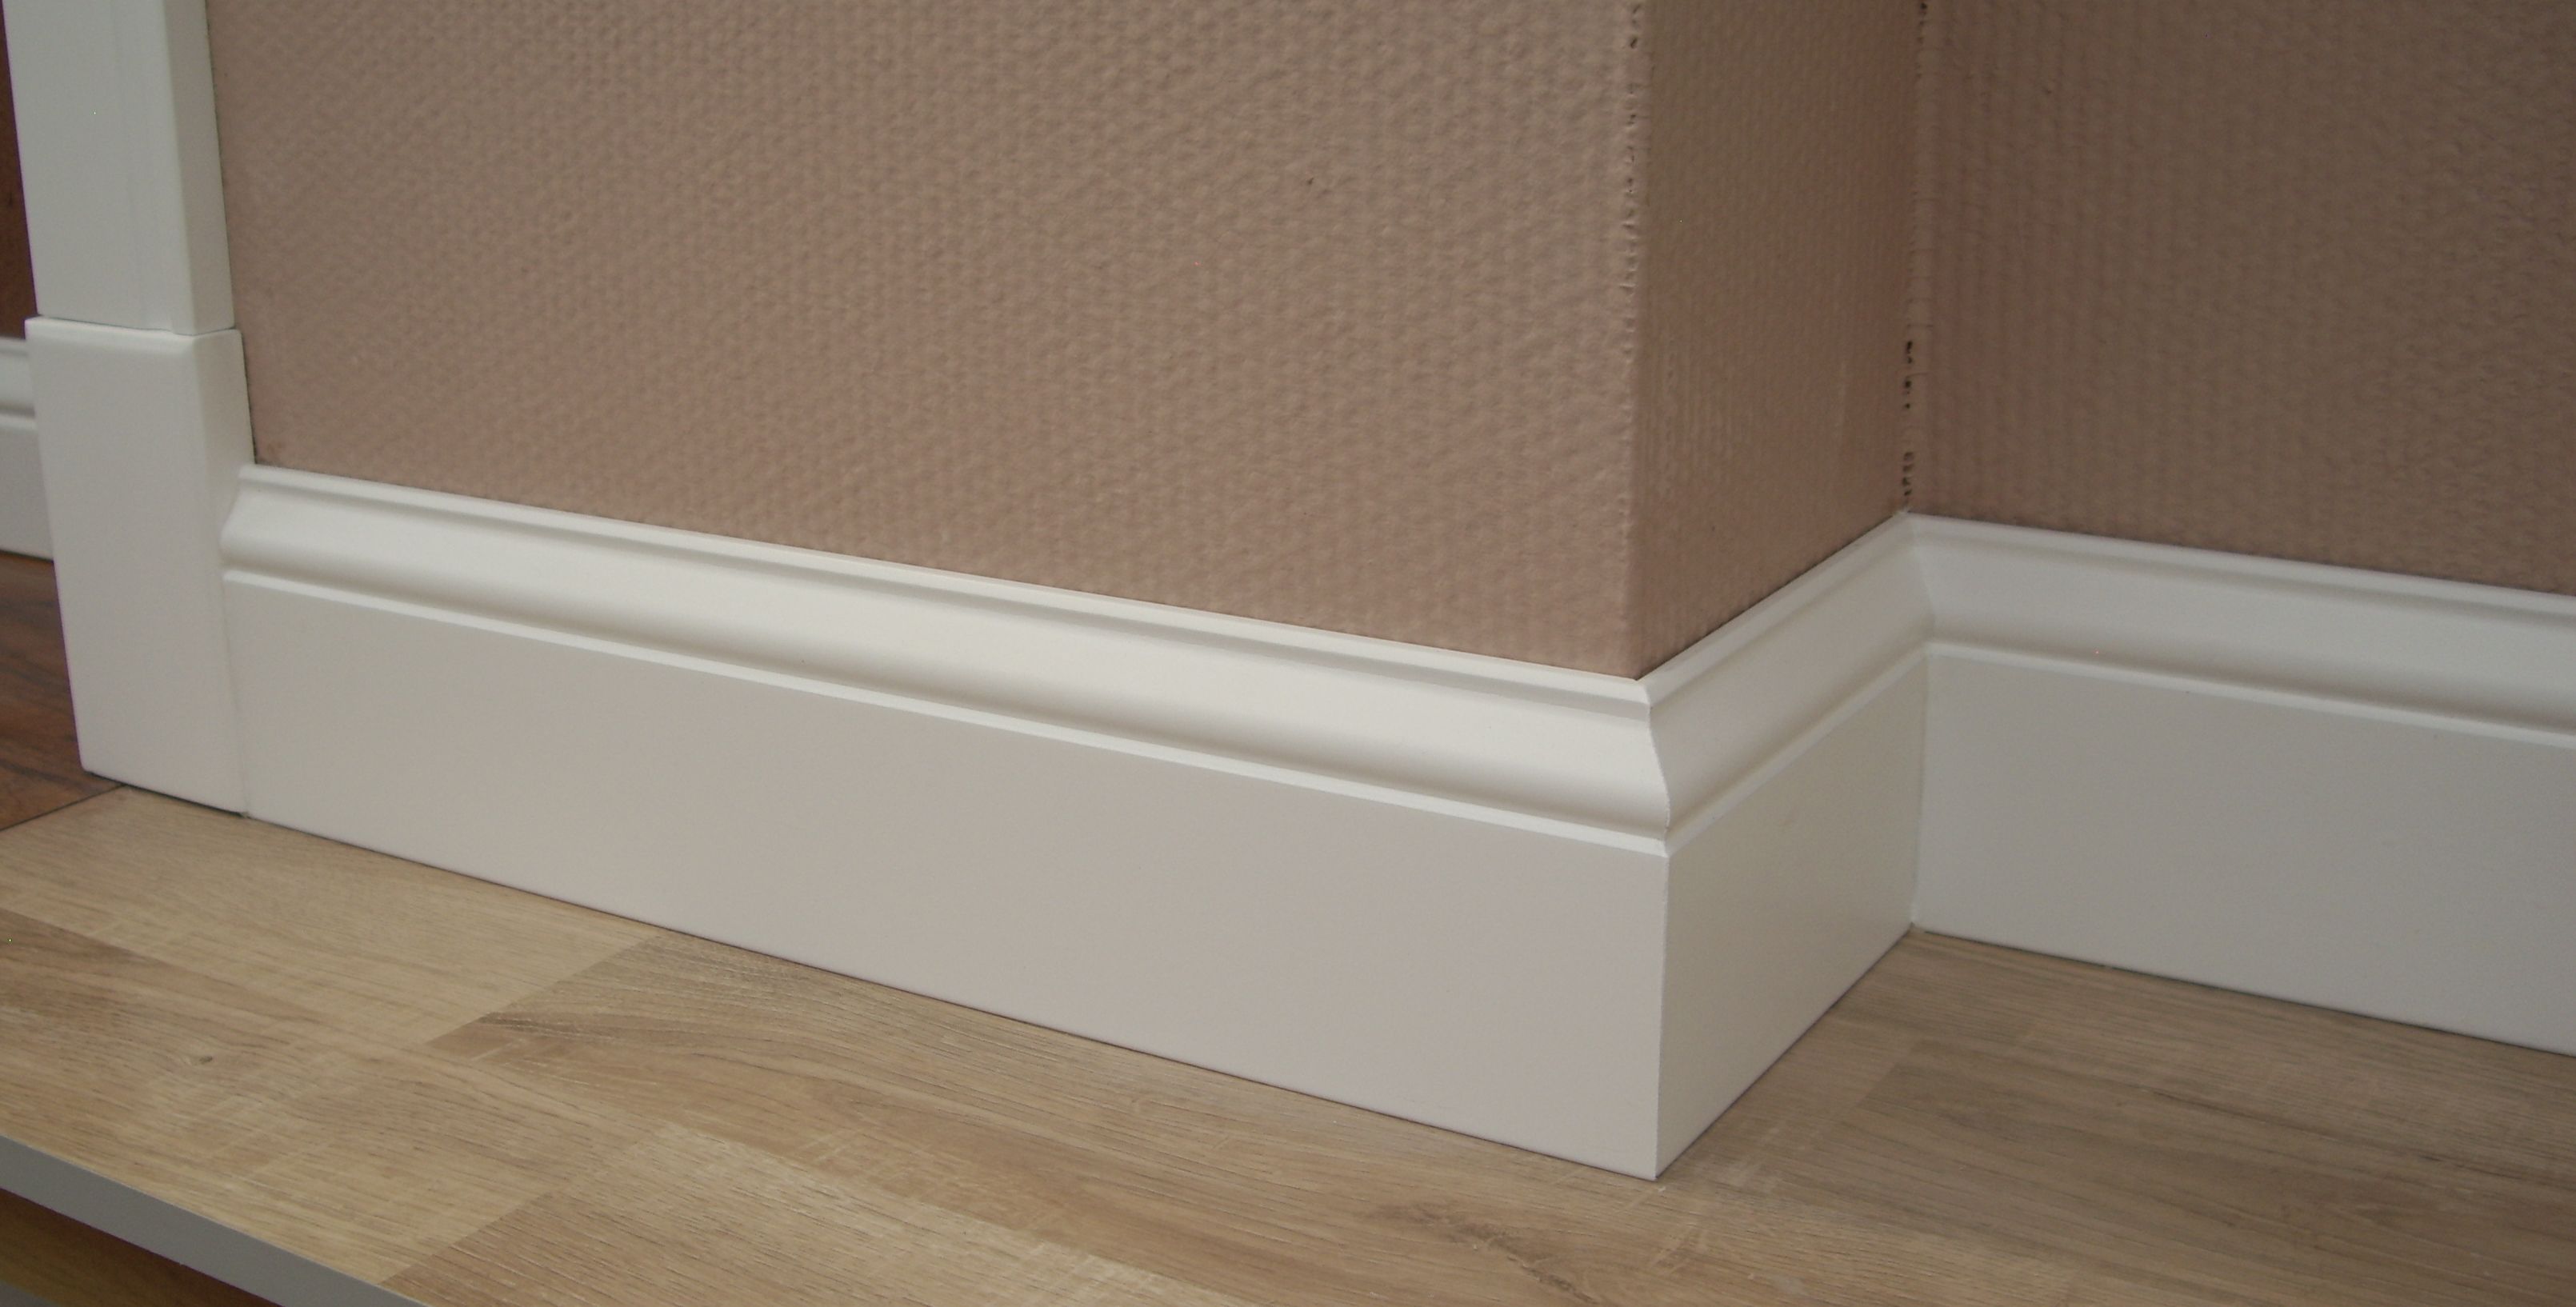 white plastic baseboard in the interior of the house